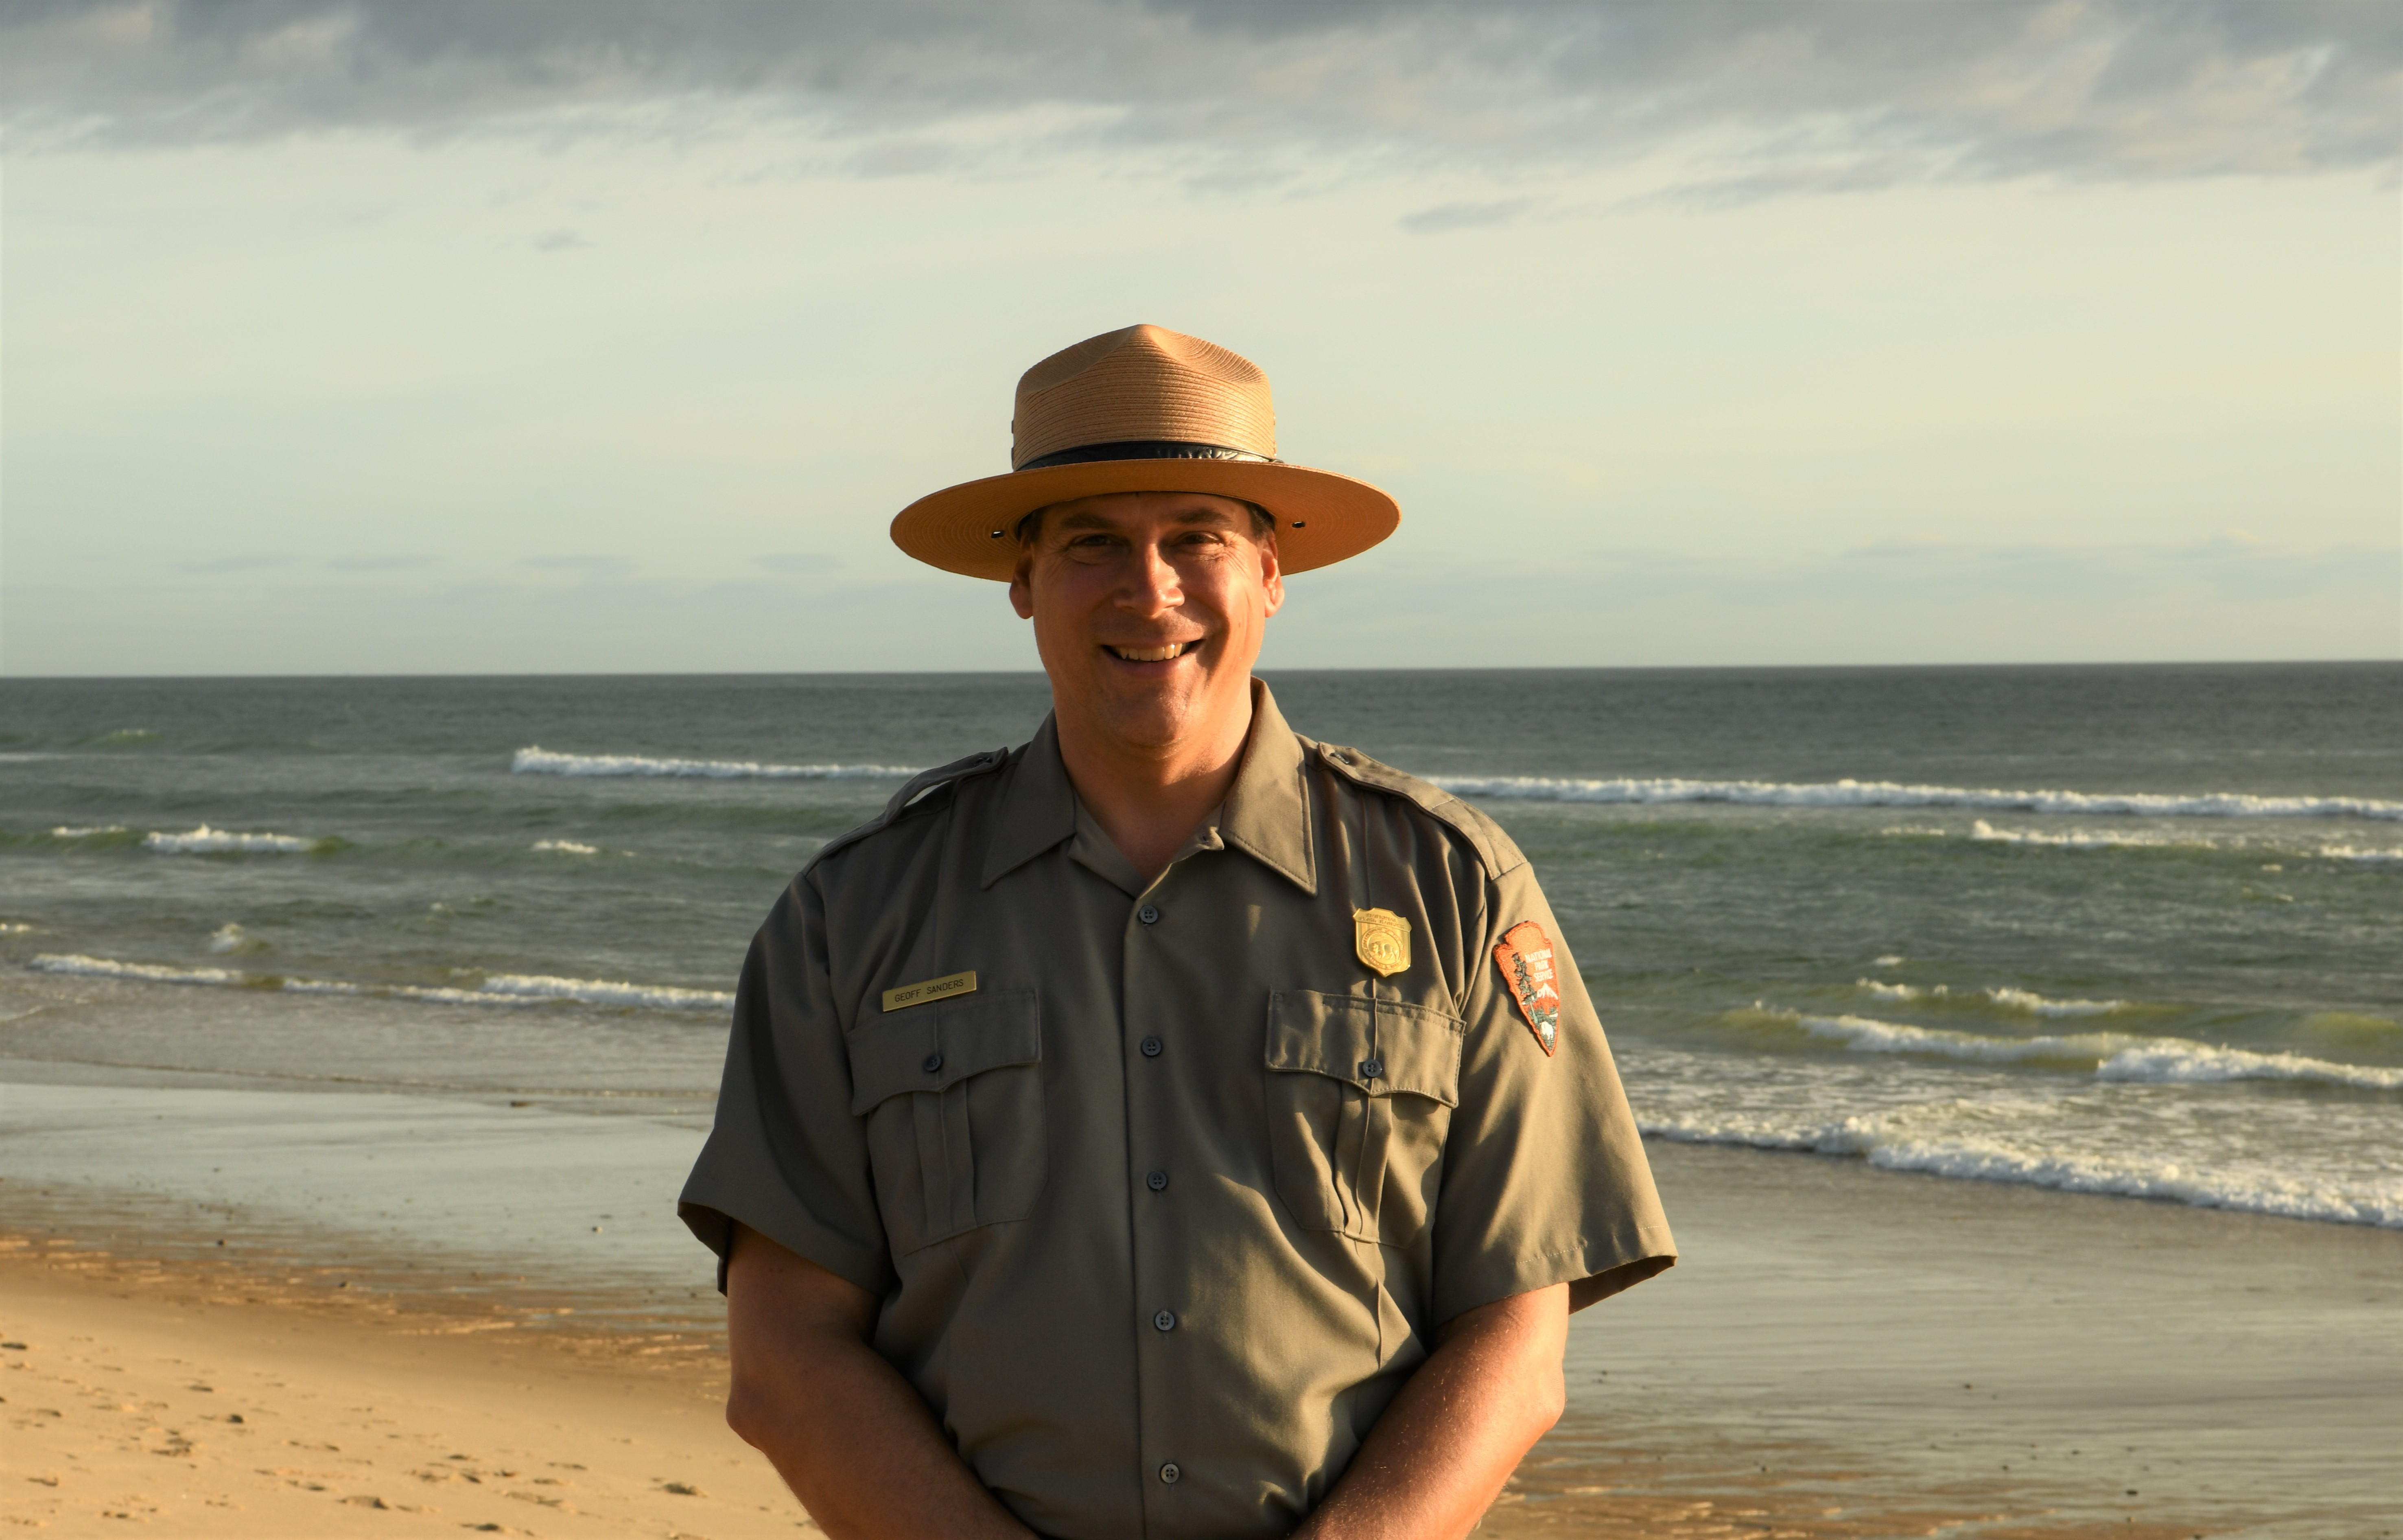 A ranger stands at the seashore